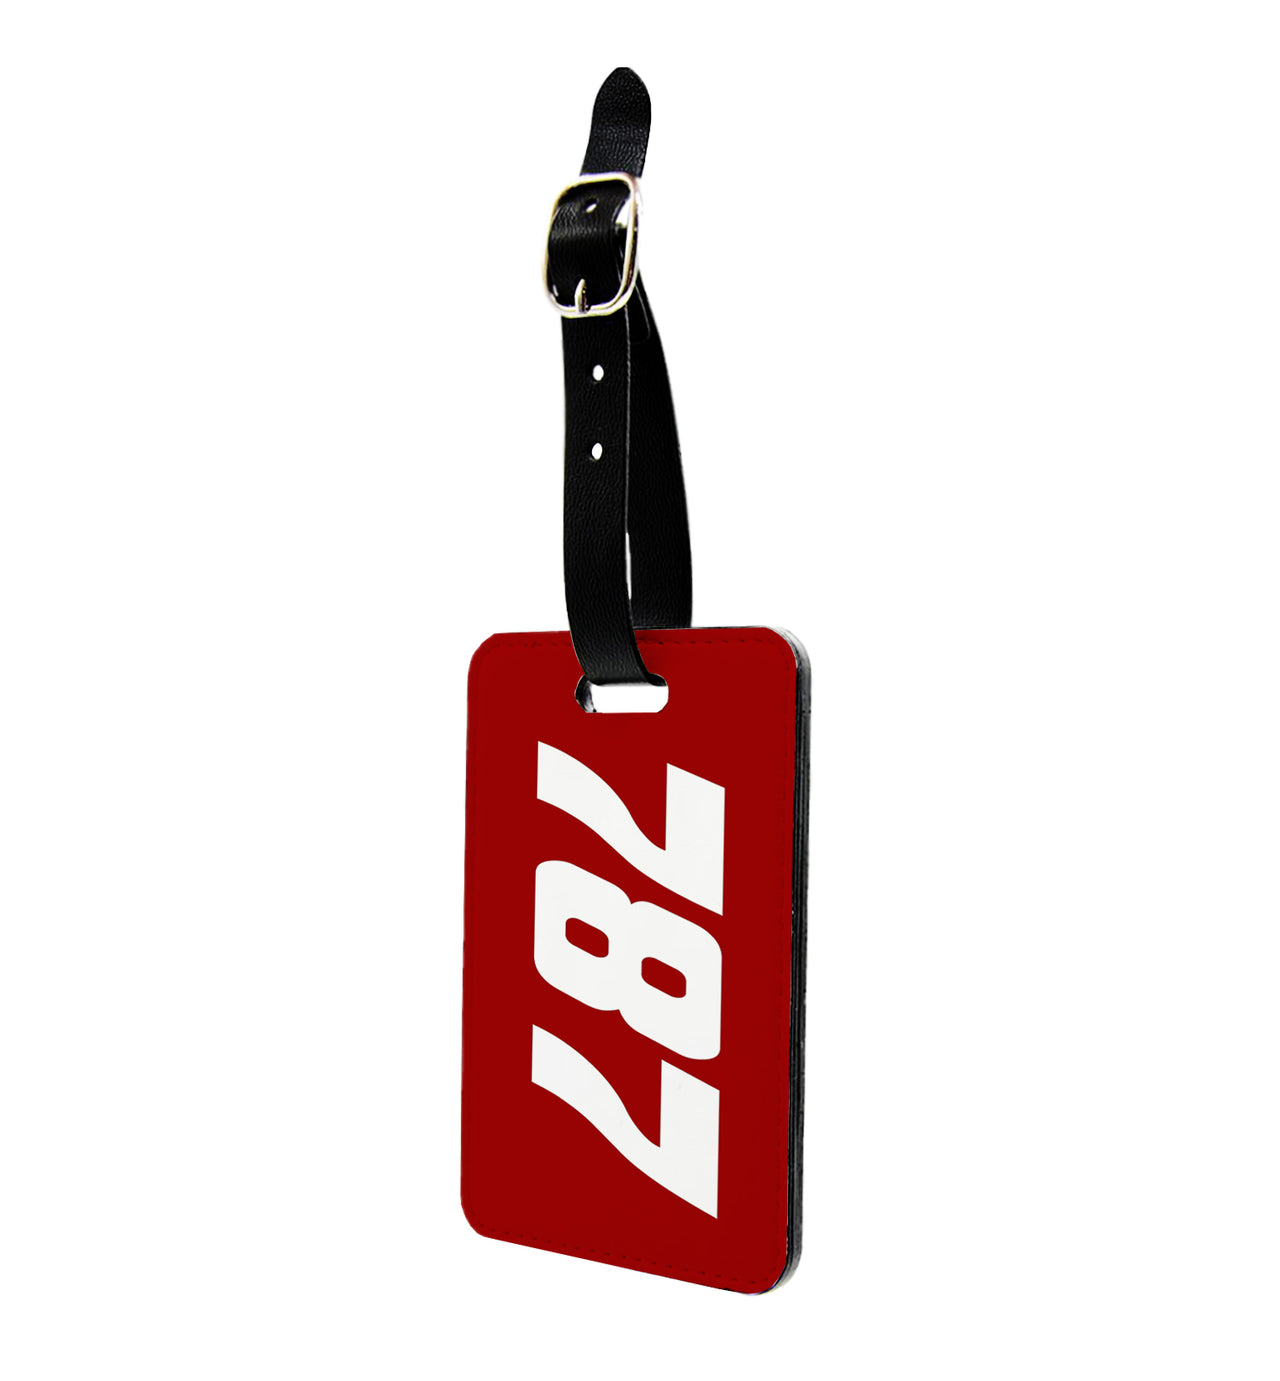 Boeing 787 Text Designed Luggage Tag